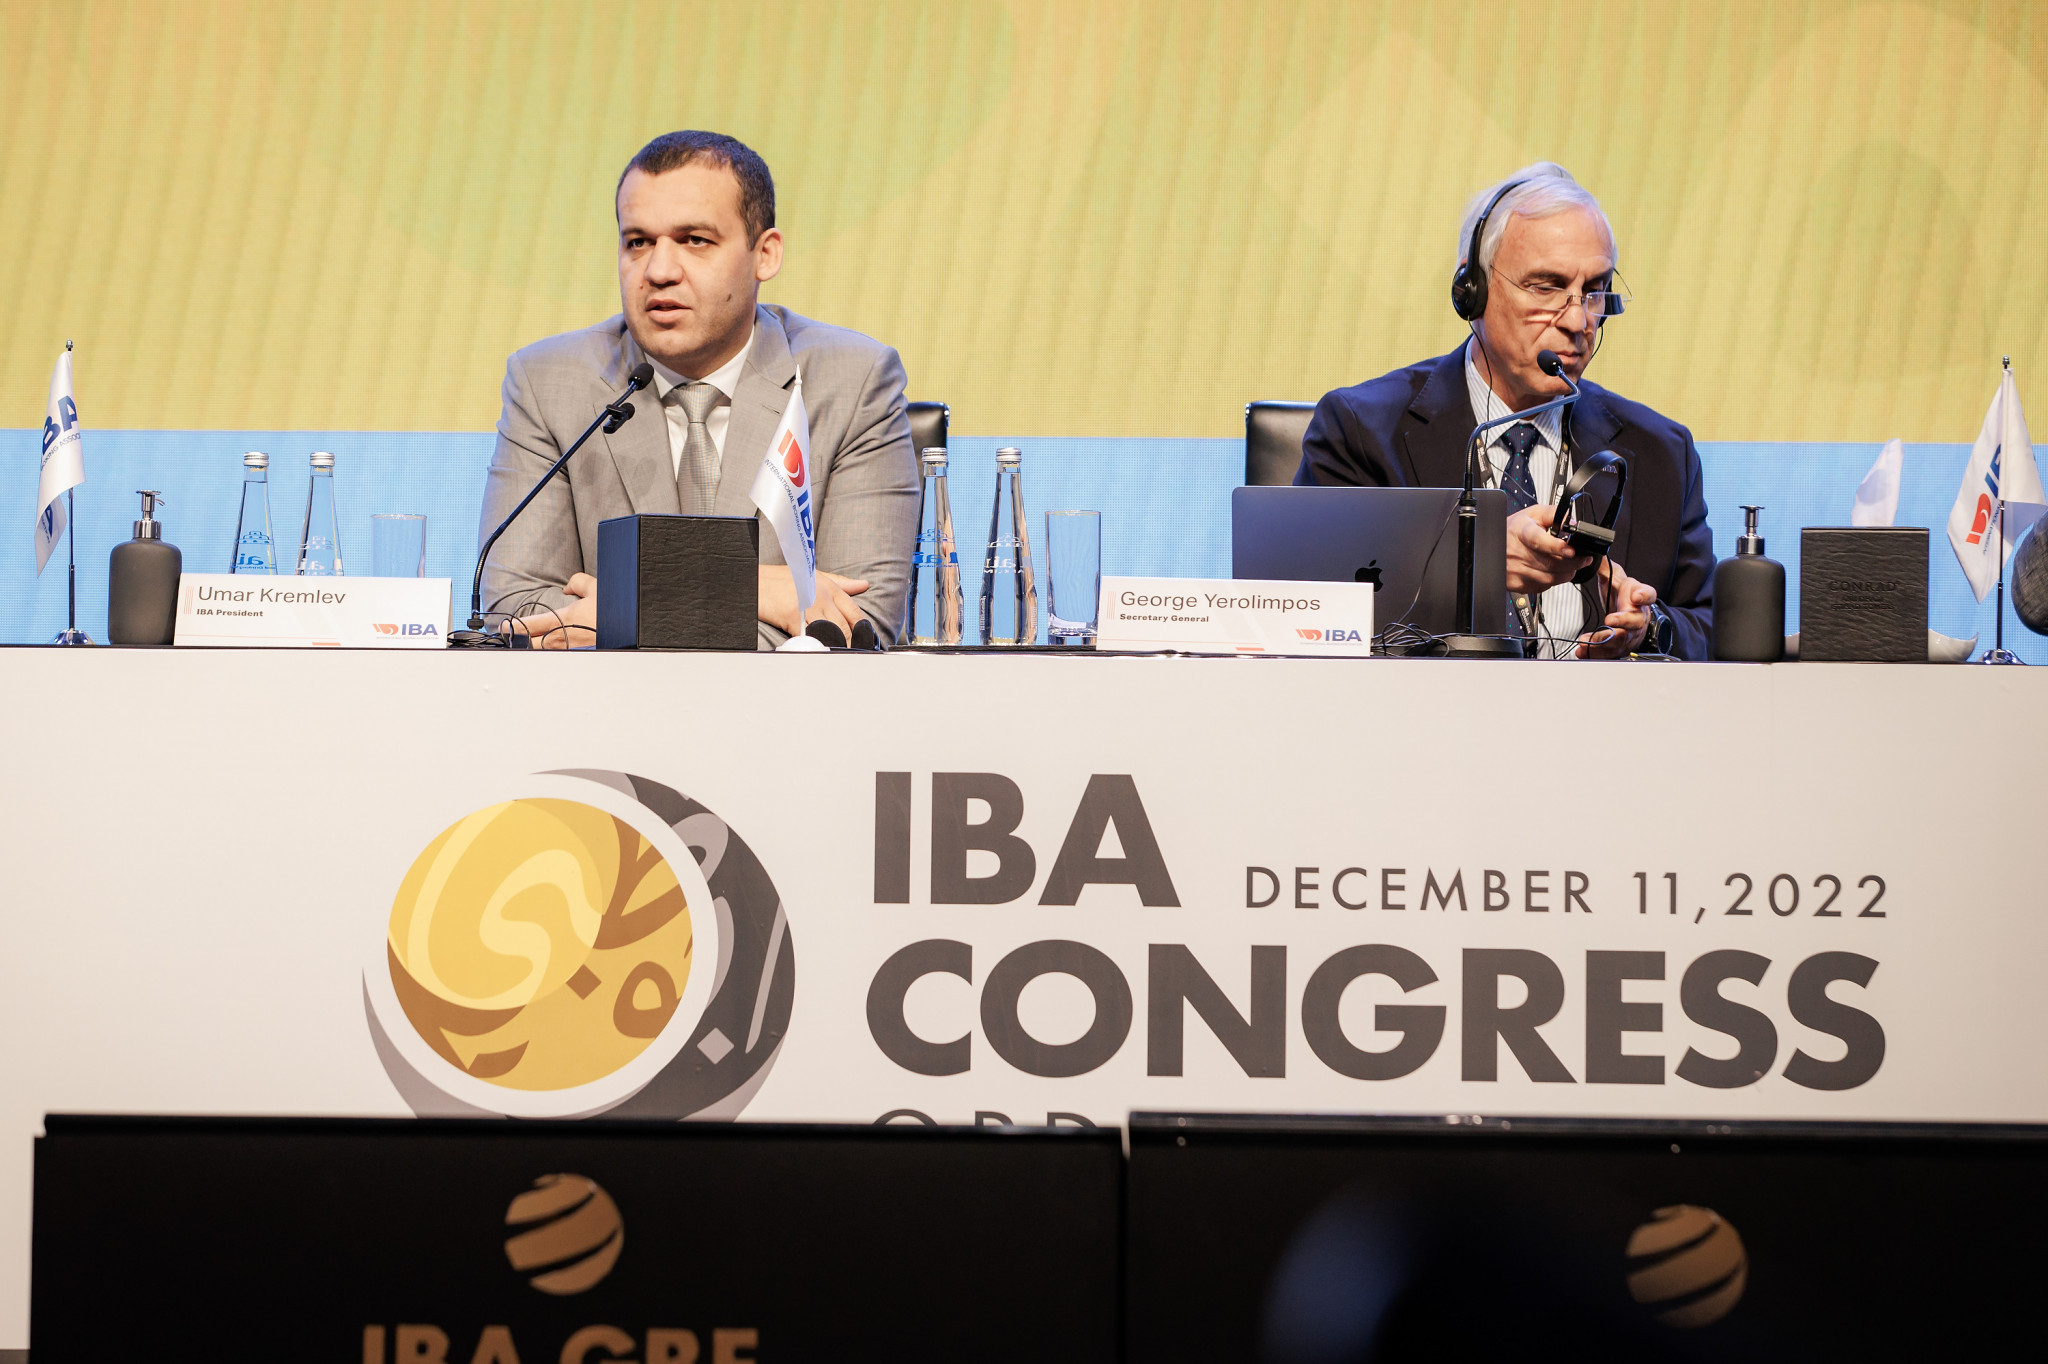 Membership issues, a report from secretary general George Yerolimpos, right, a presentation of audited financial accounts and a report from Richard McLaren all took place ©IBA